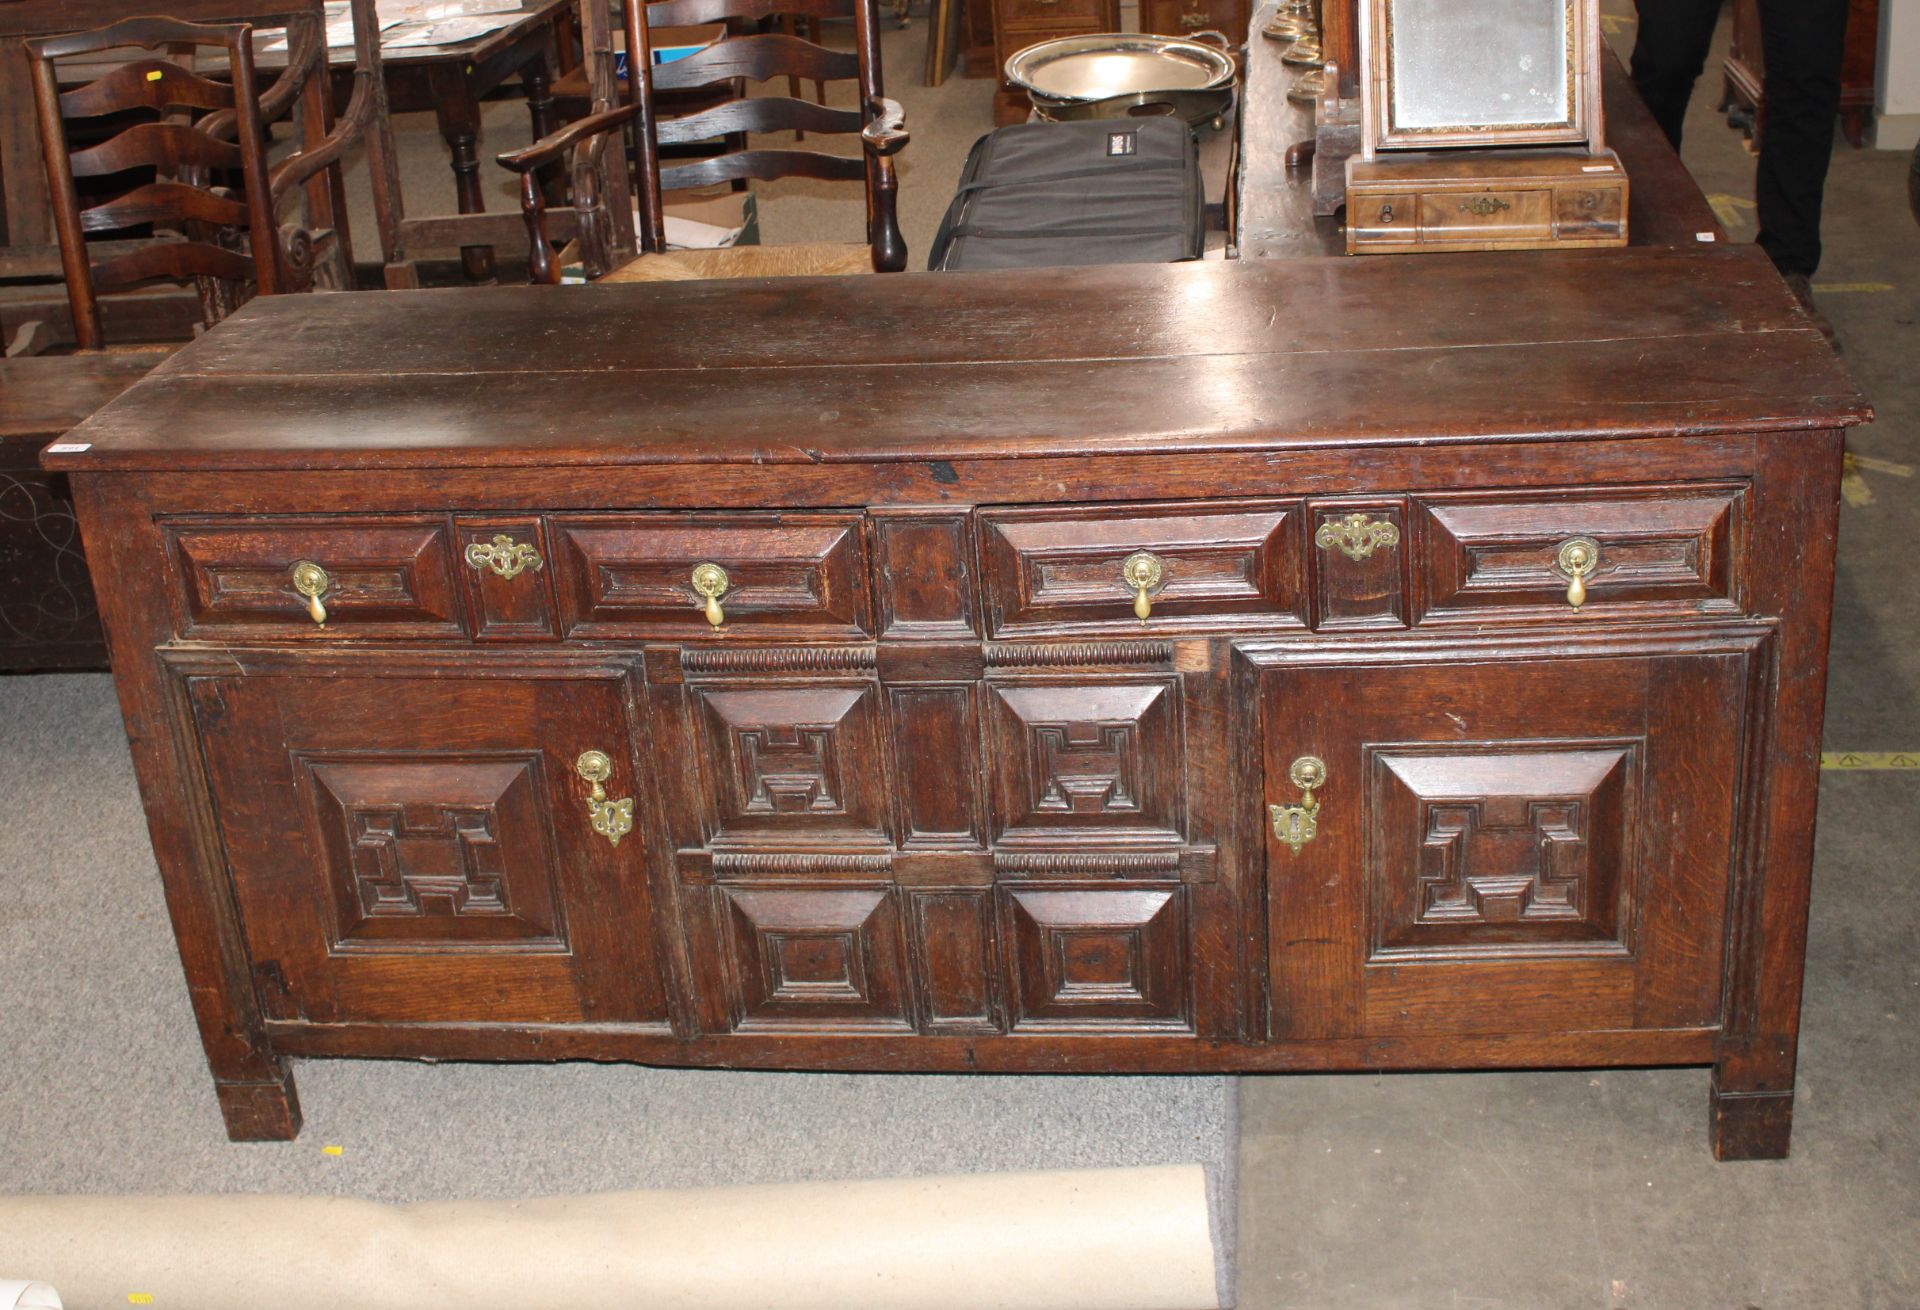 An 18th century oak dresser base, the drawers and